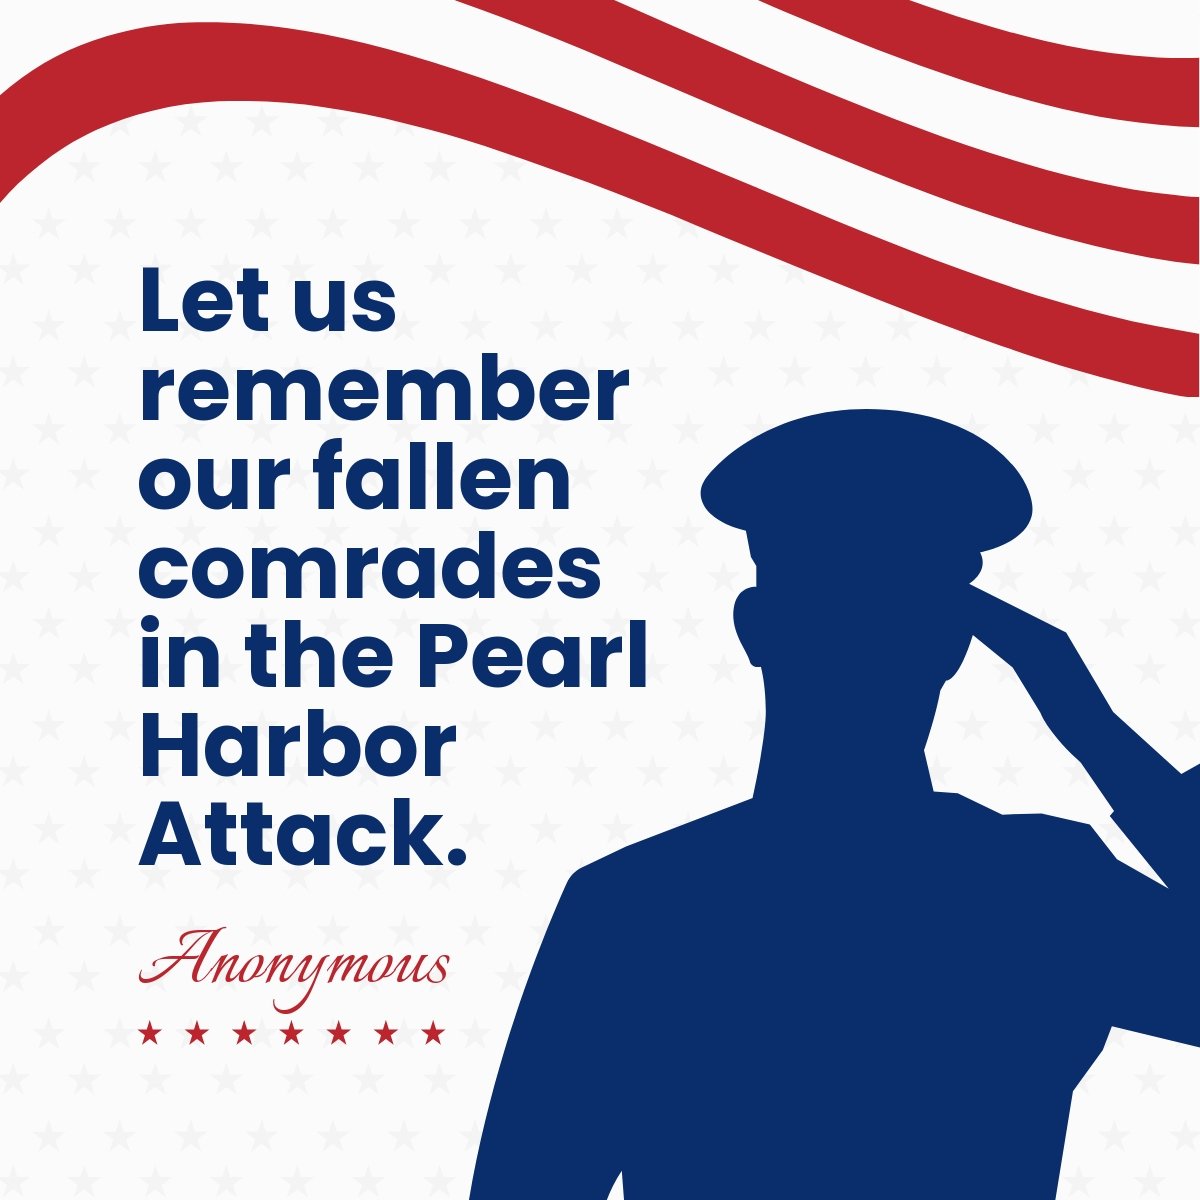 Free Pearl Harbor Remembrance Day Quote LinkedIn Post Template - Download  in PNG, JPG